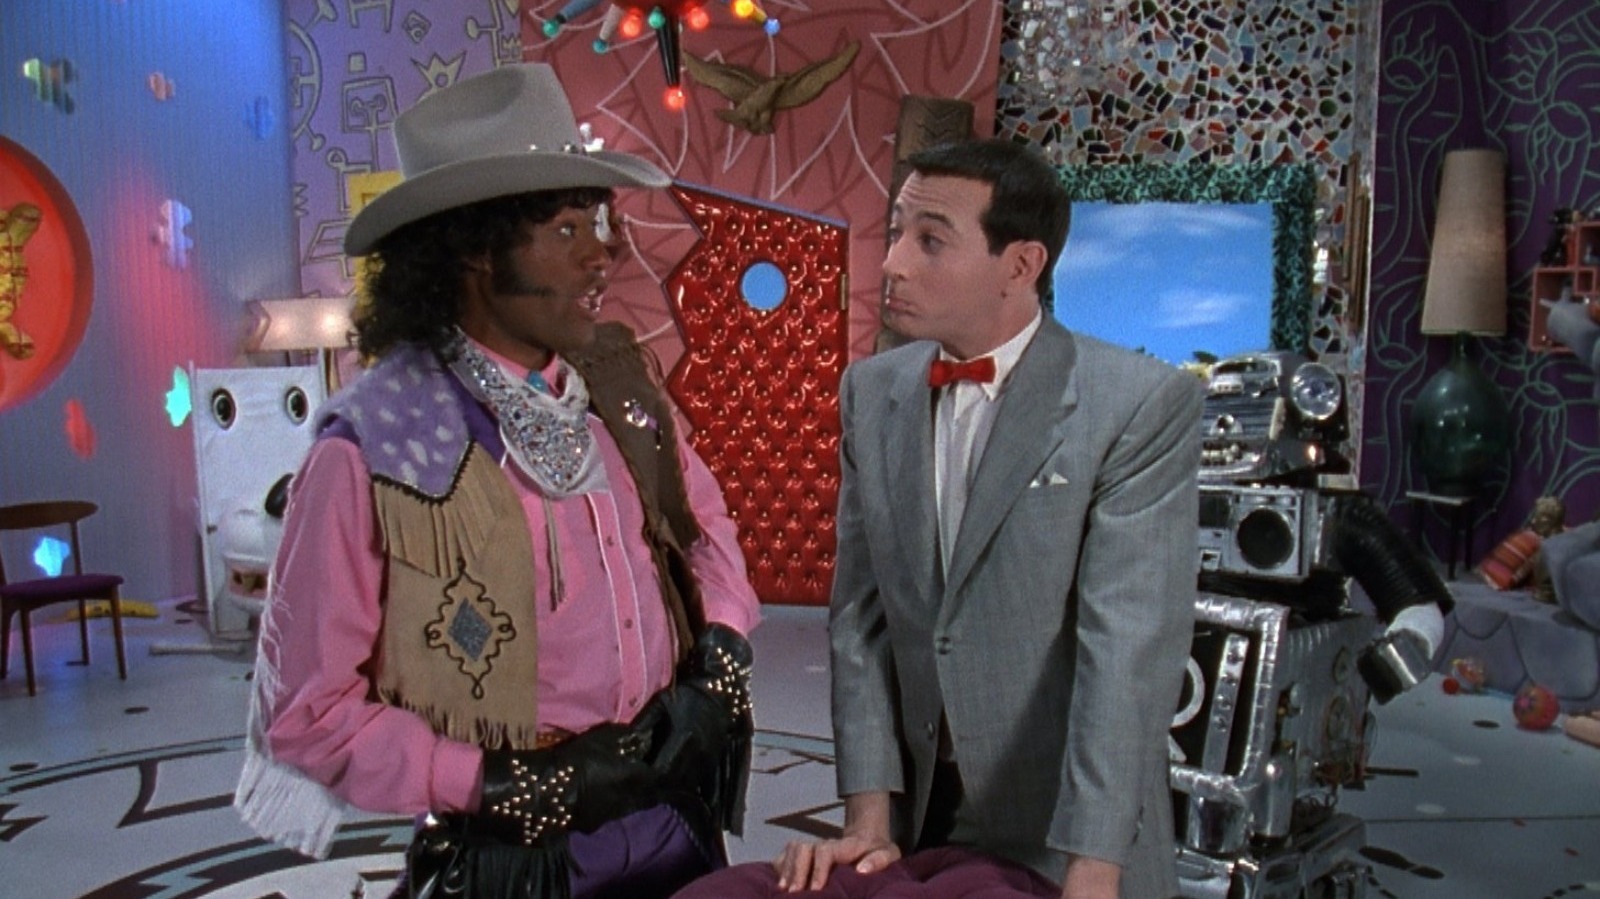 Here's Where You Can Watch Pee-Wee's Playhouse